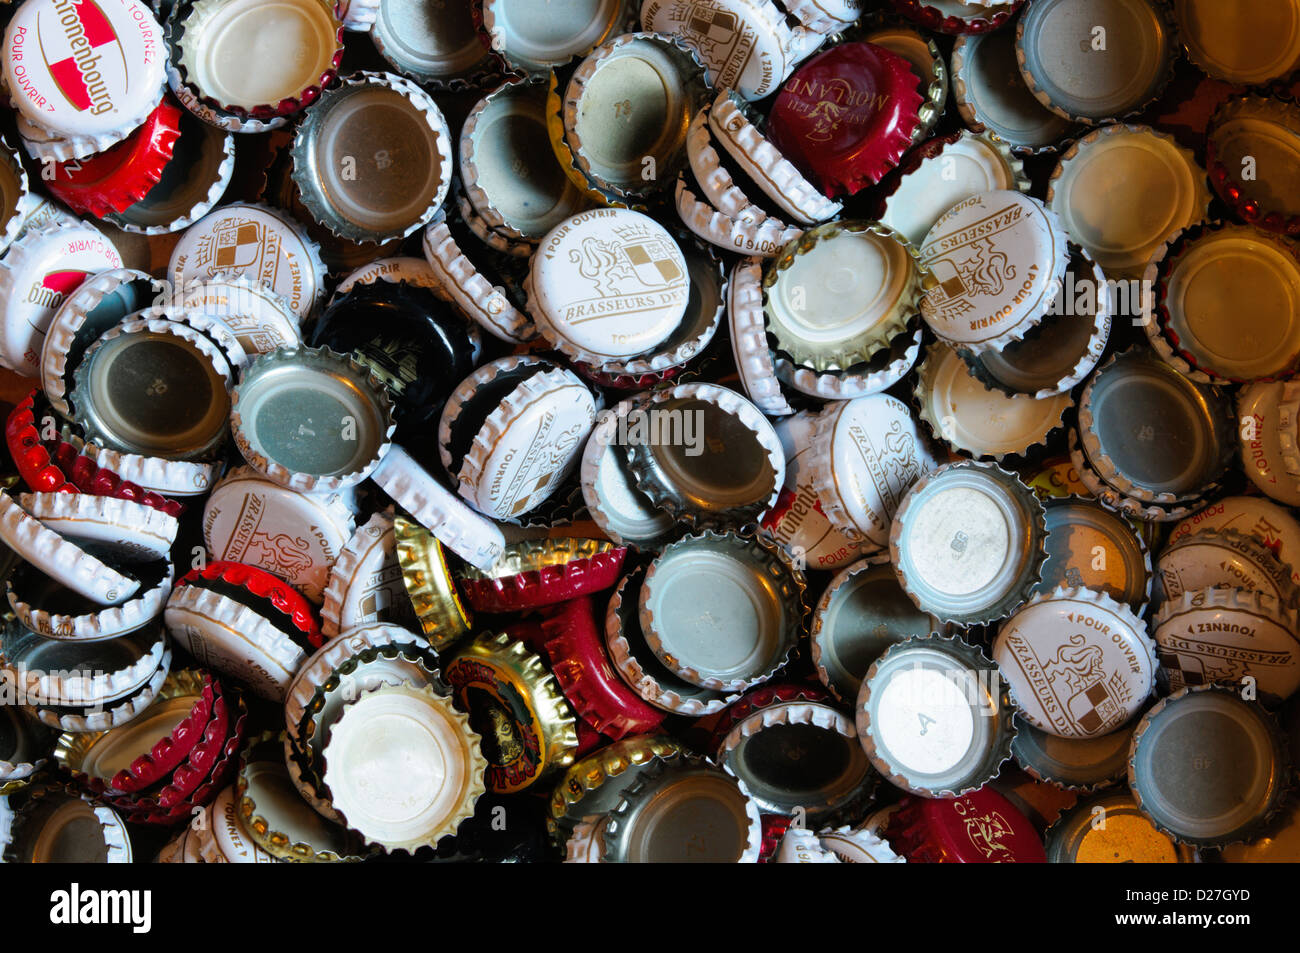 A pile of beer bottle tops. Stock Photo